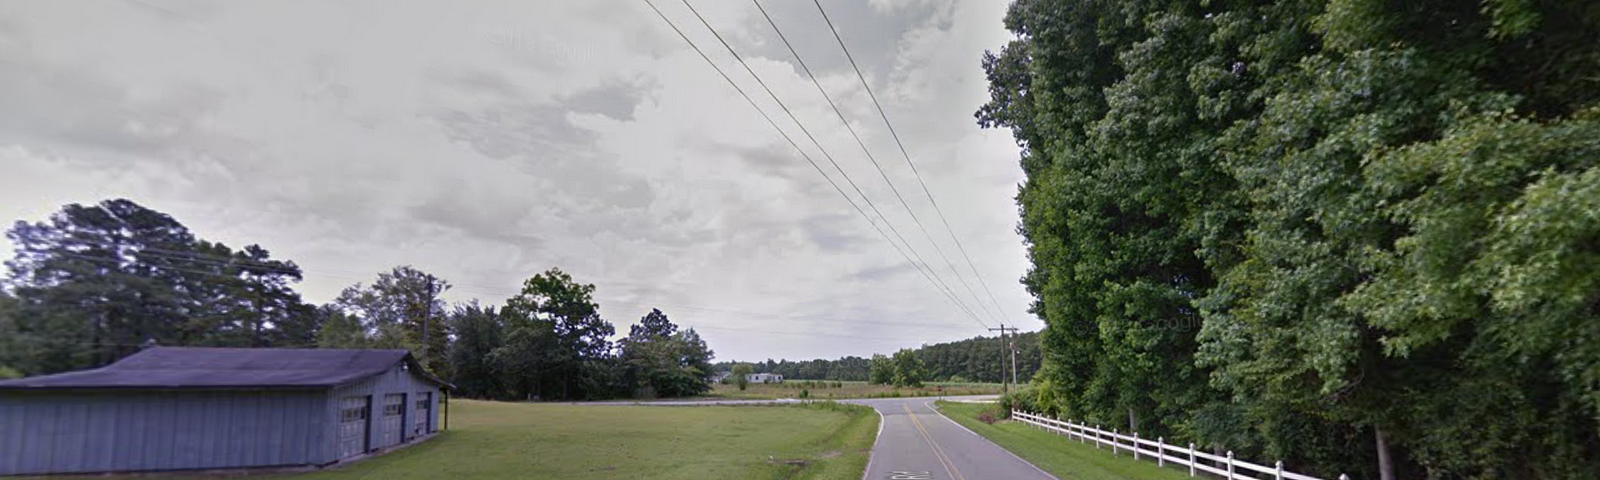 Microwave Tower Road in Sampson County, North Carolina, near where Tristen Alan “Buddy” Myers went missing in October of 2000